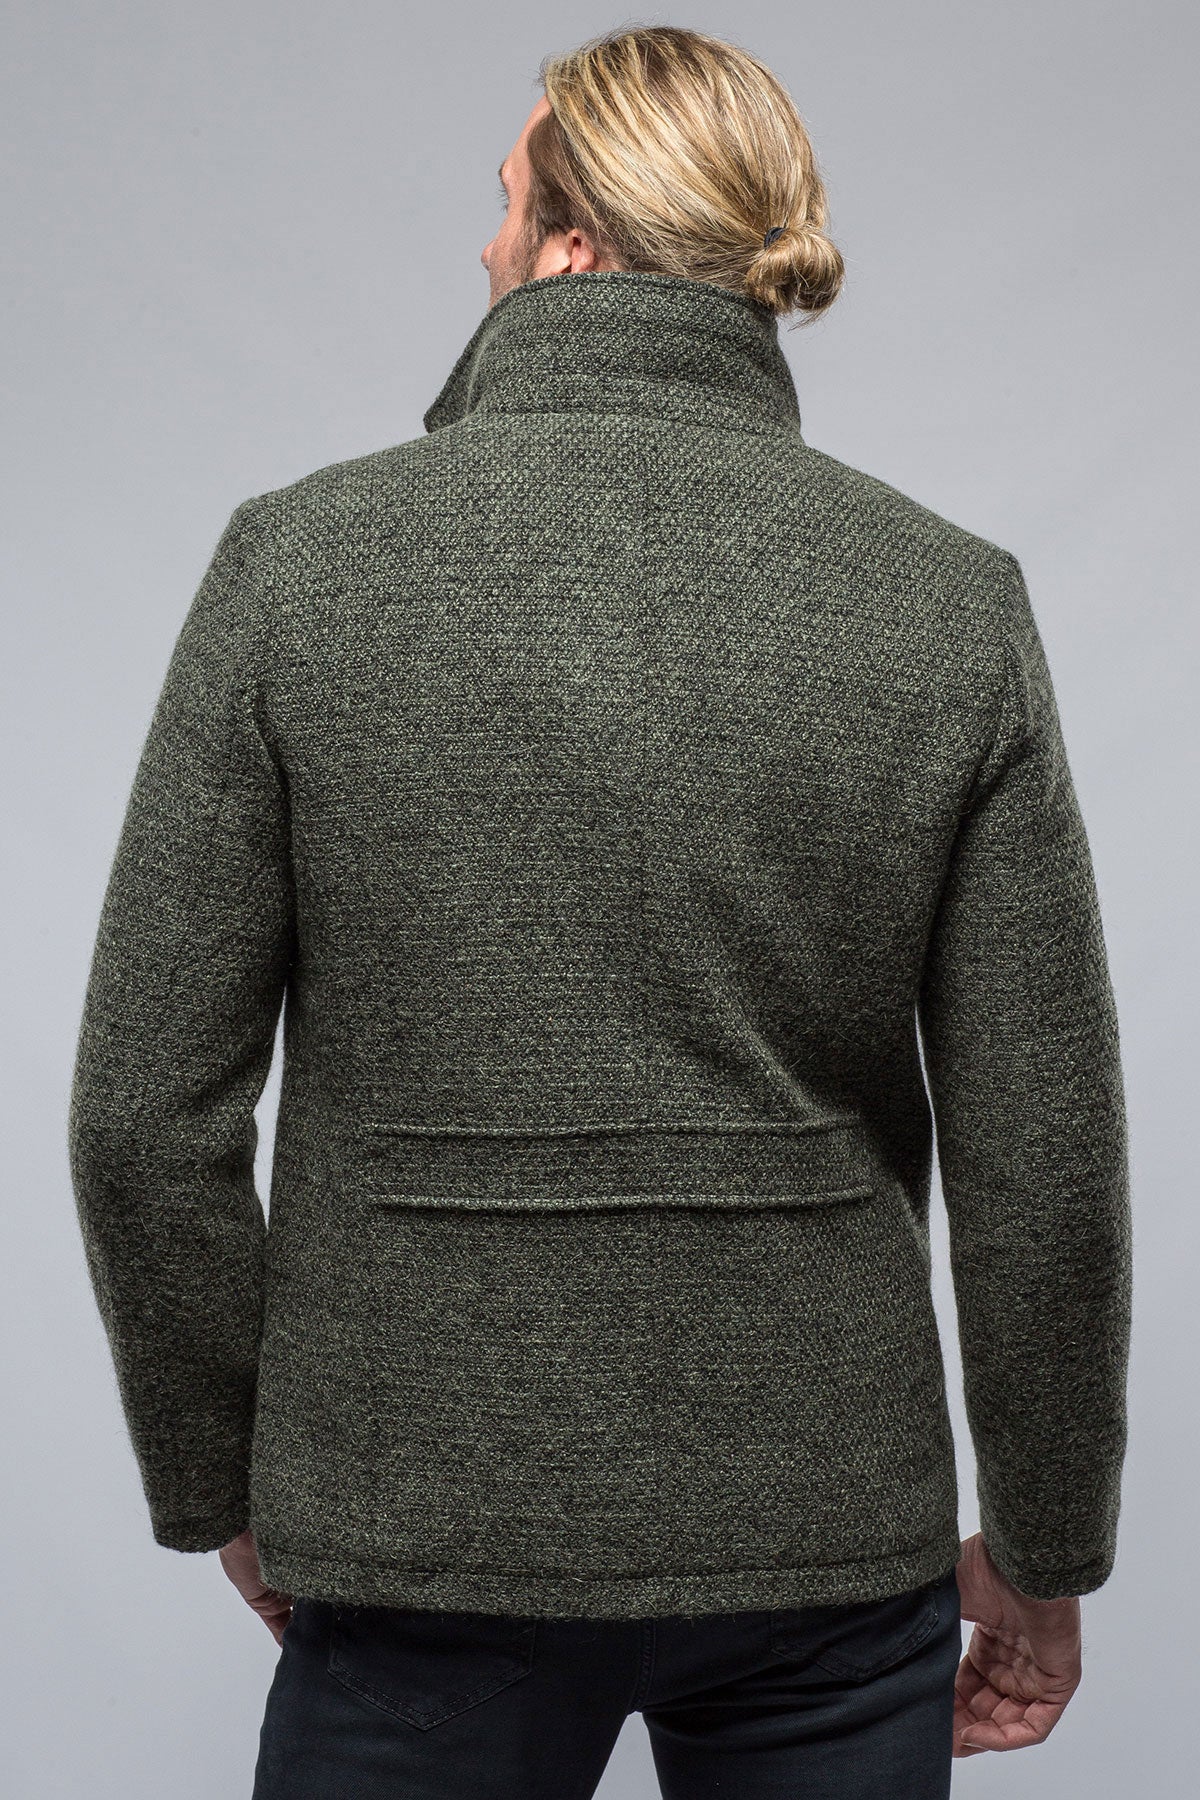 Body Wool/Mohair Jacket | Samples - Mens - Outerwear - Cloth | Gimo's